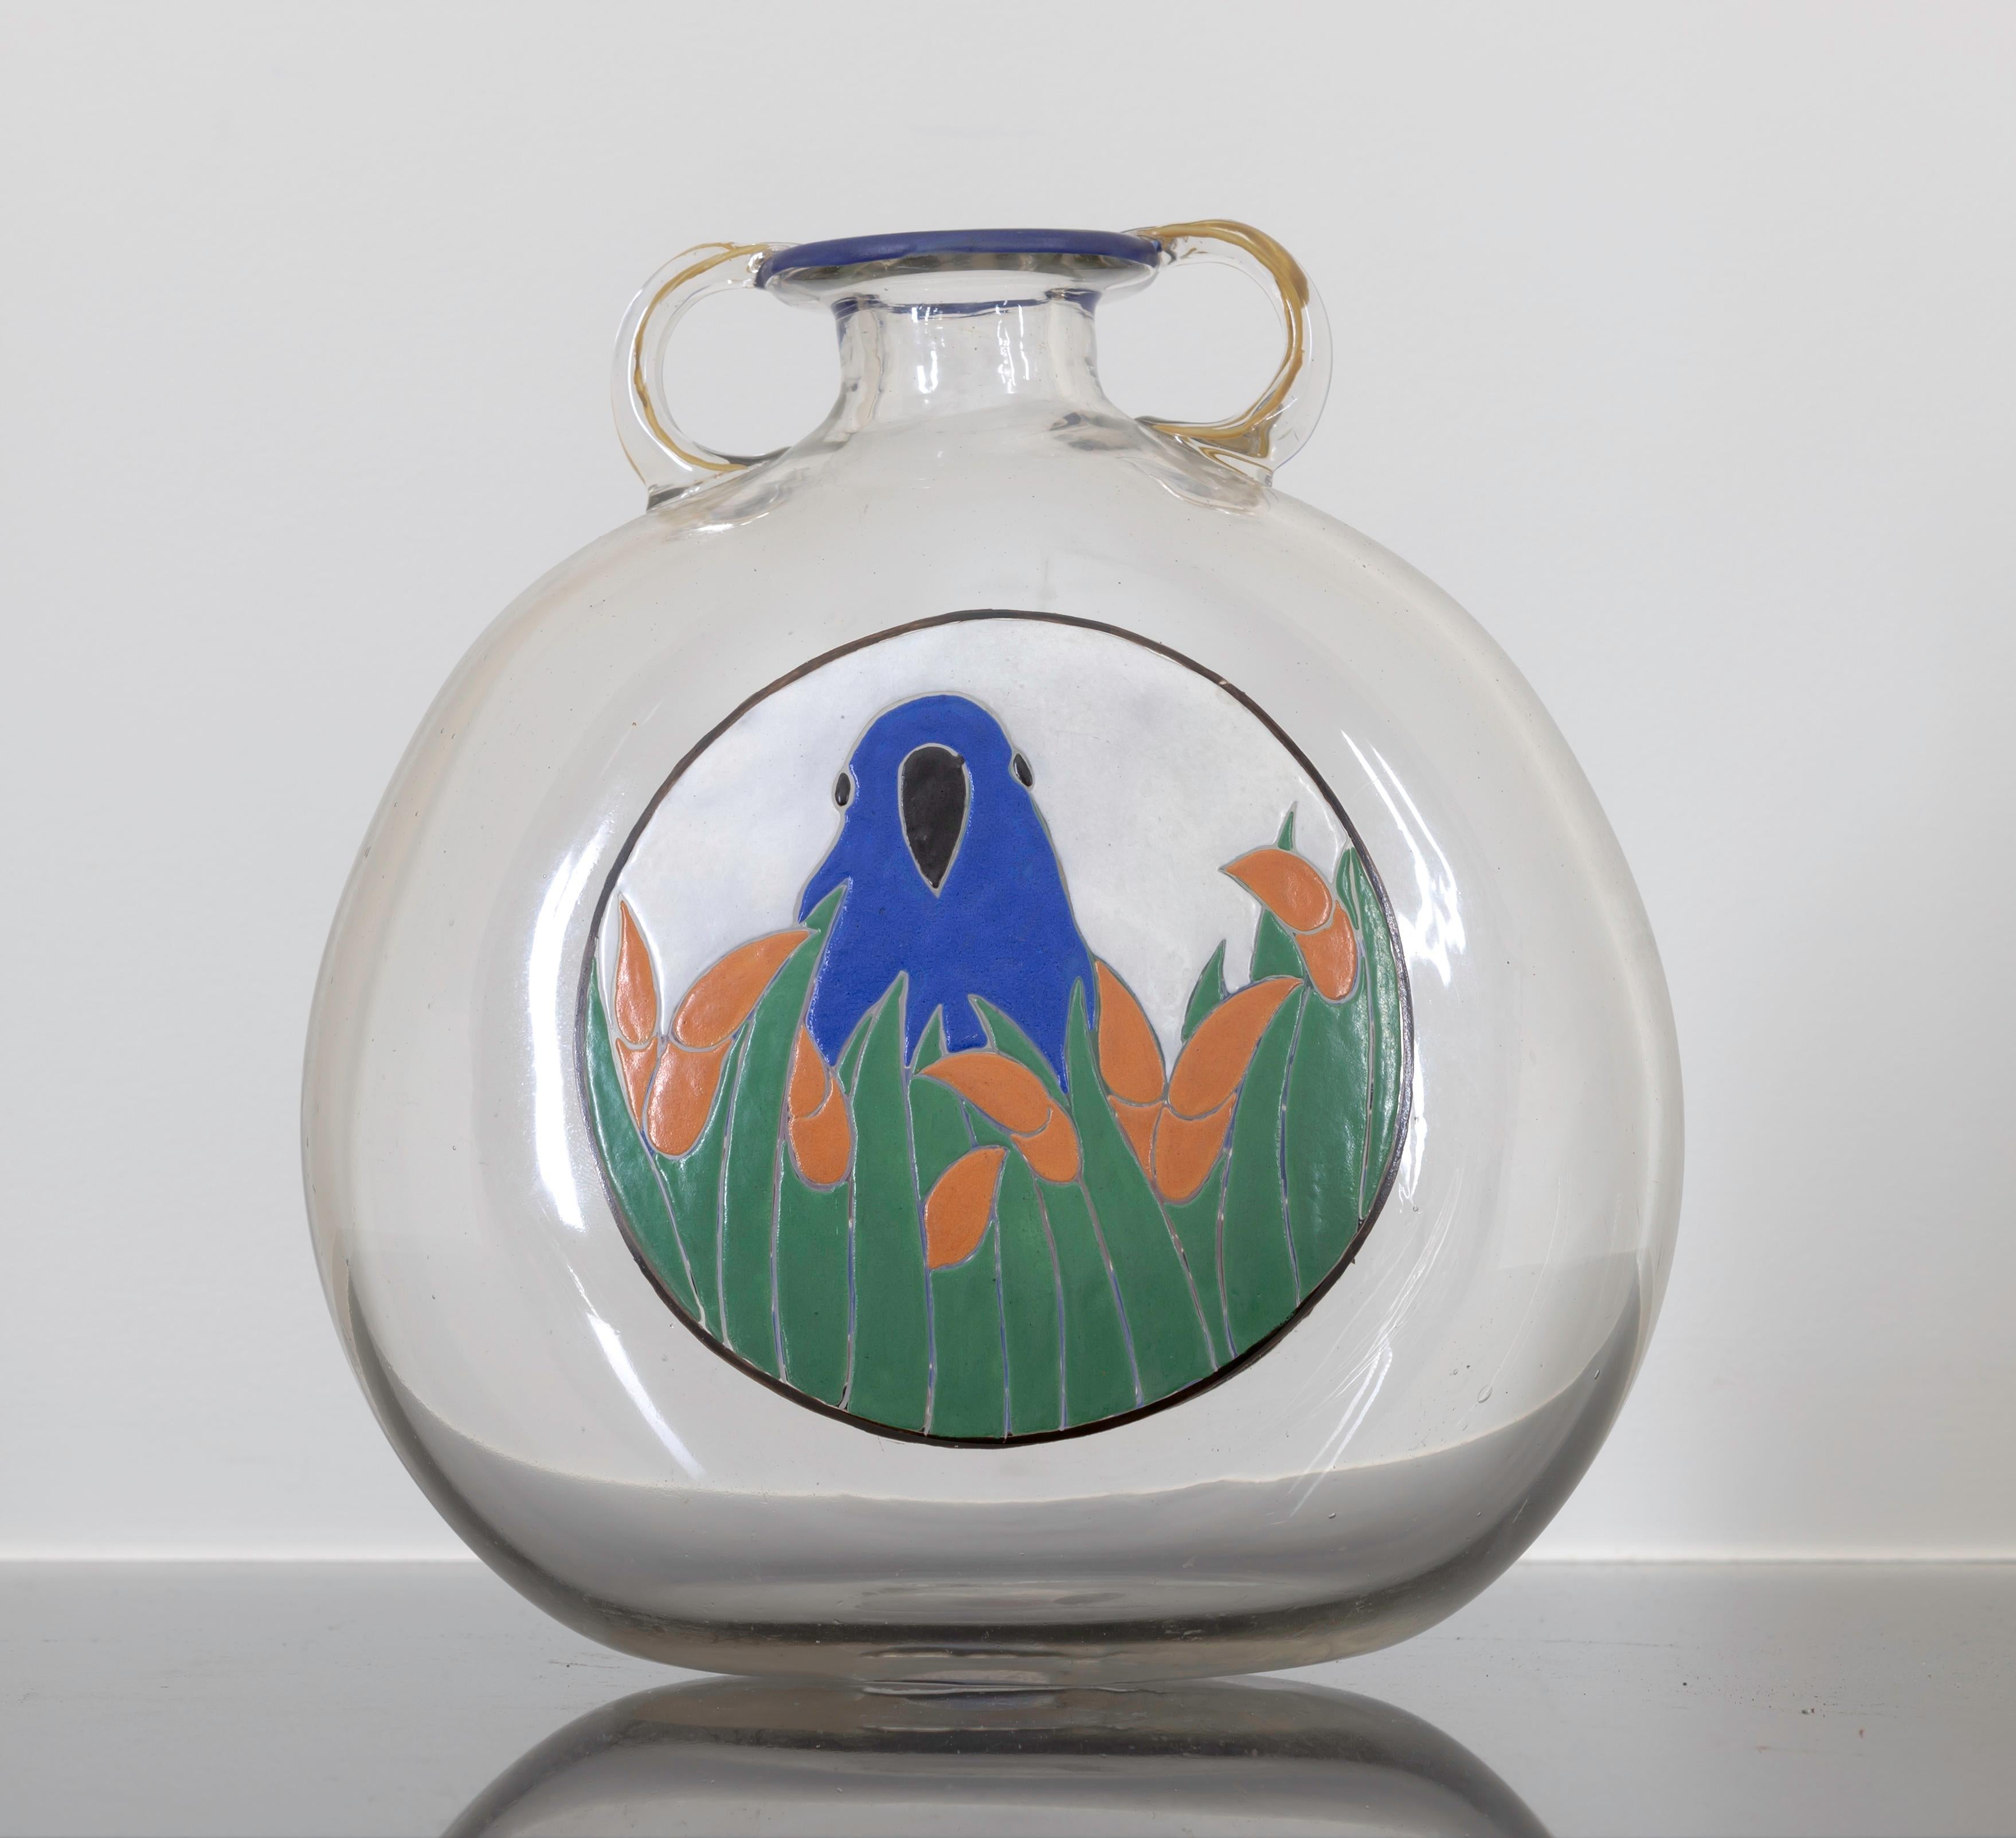 A clear hand blown vessel with an image of a bird on both sides. With mark of the artist under the base.